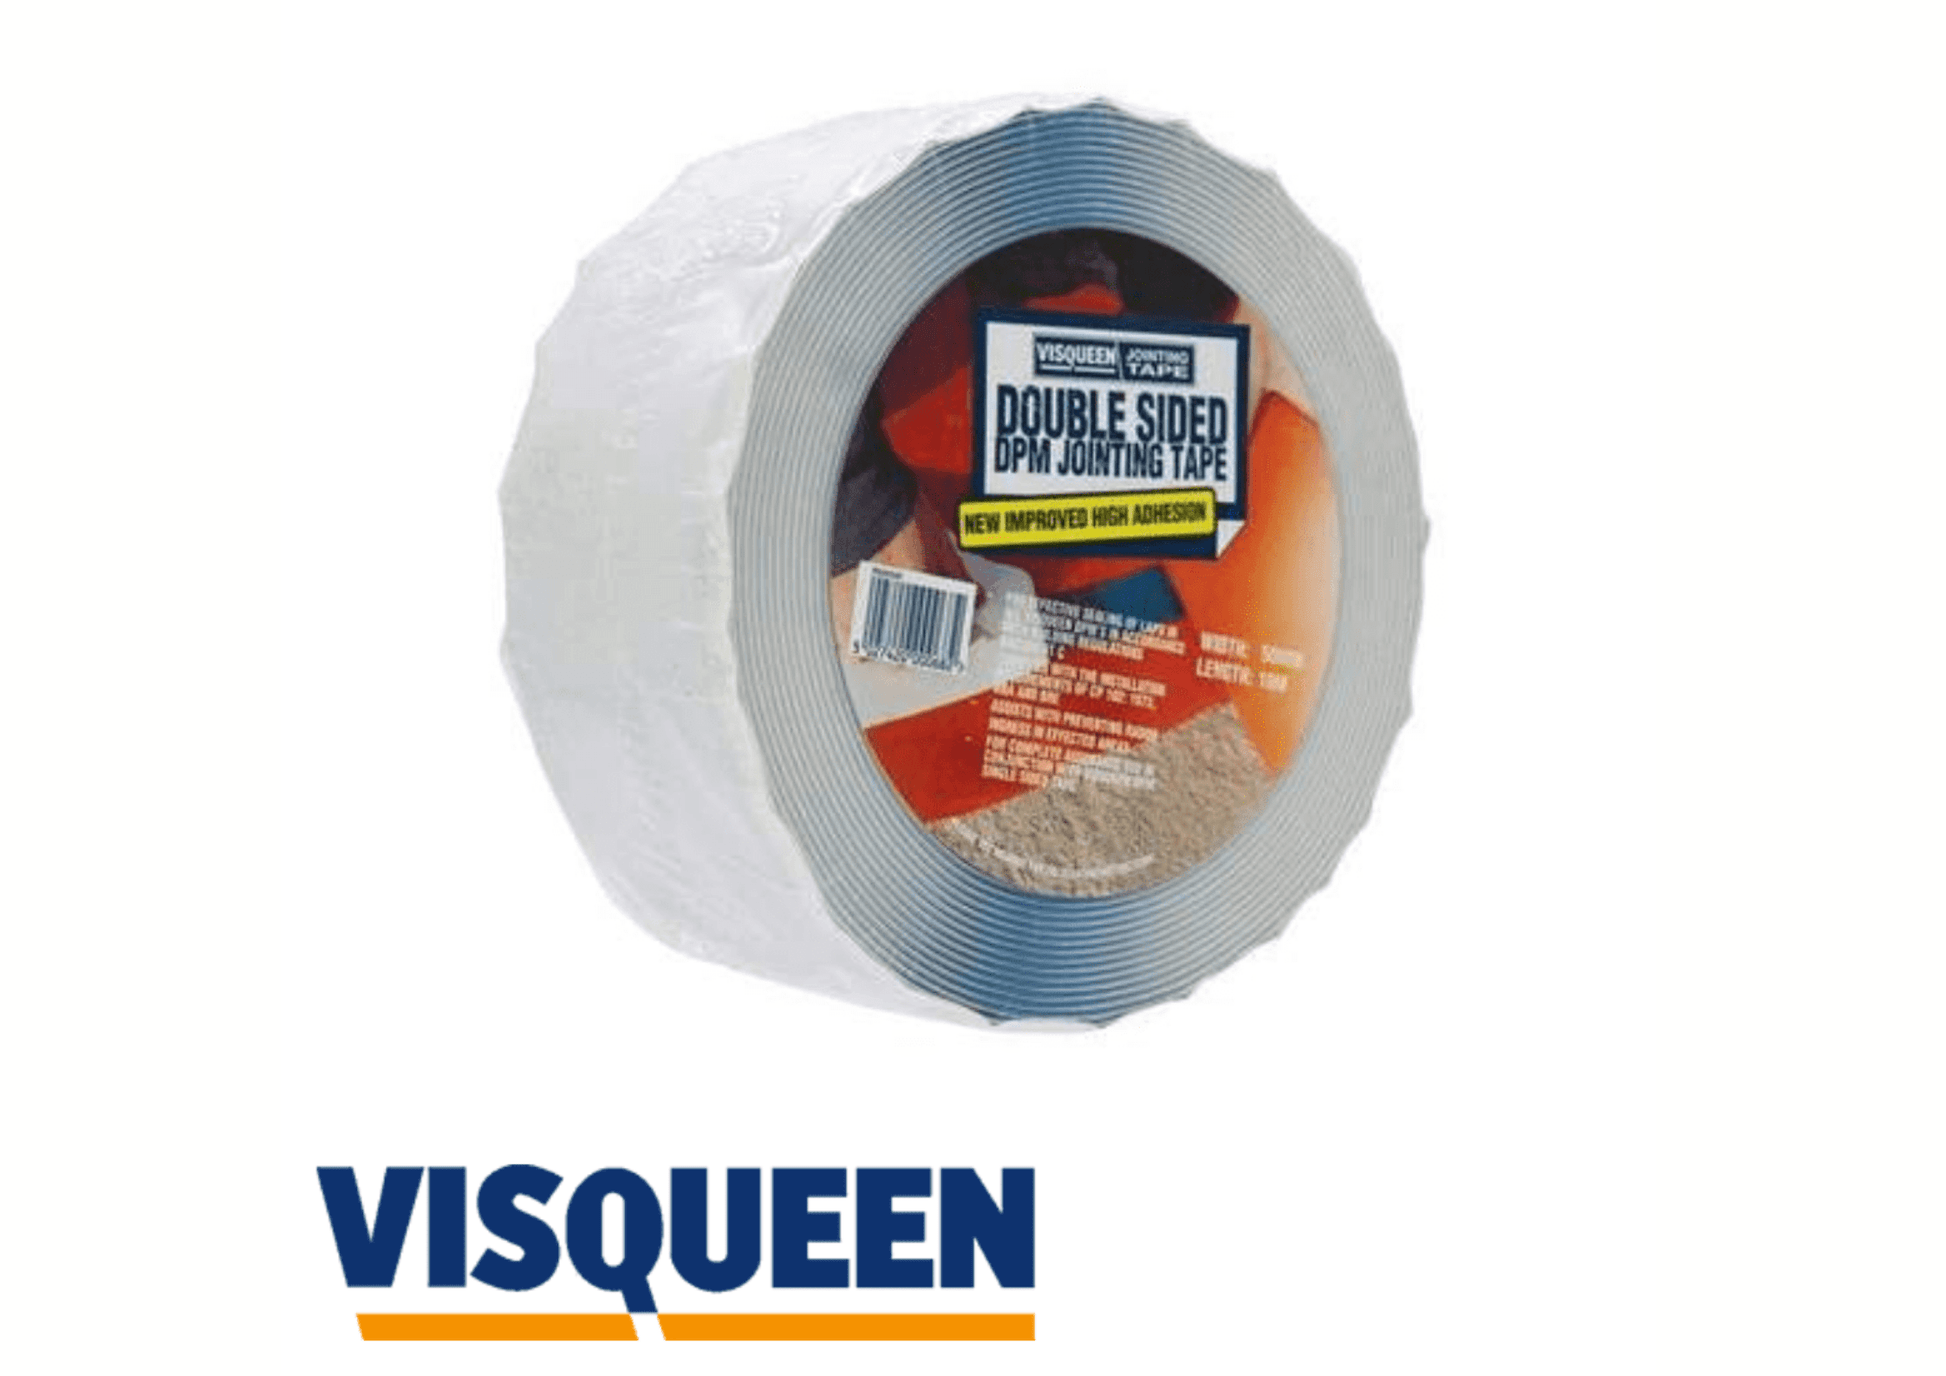 Visqueen Building Consumables Visqueen Double Sided Jointing Tape 50mm x 10m